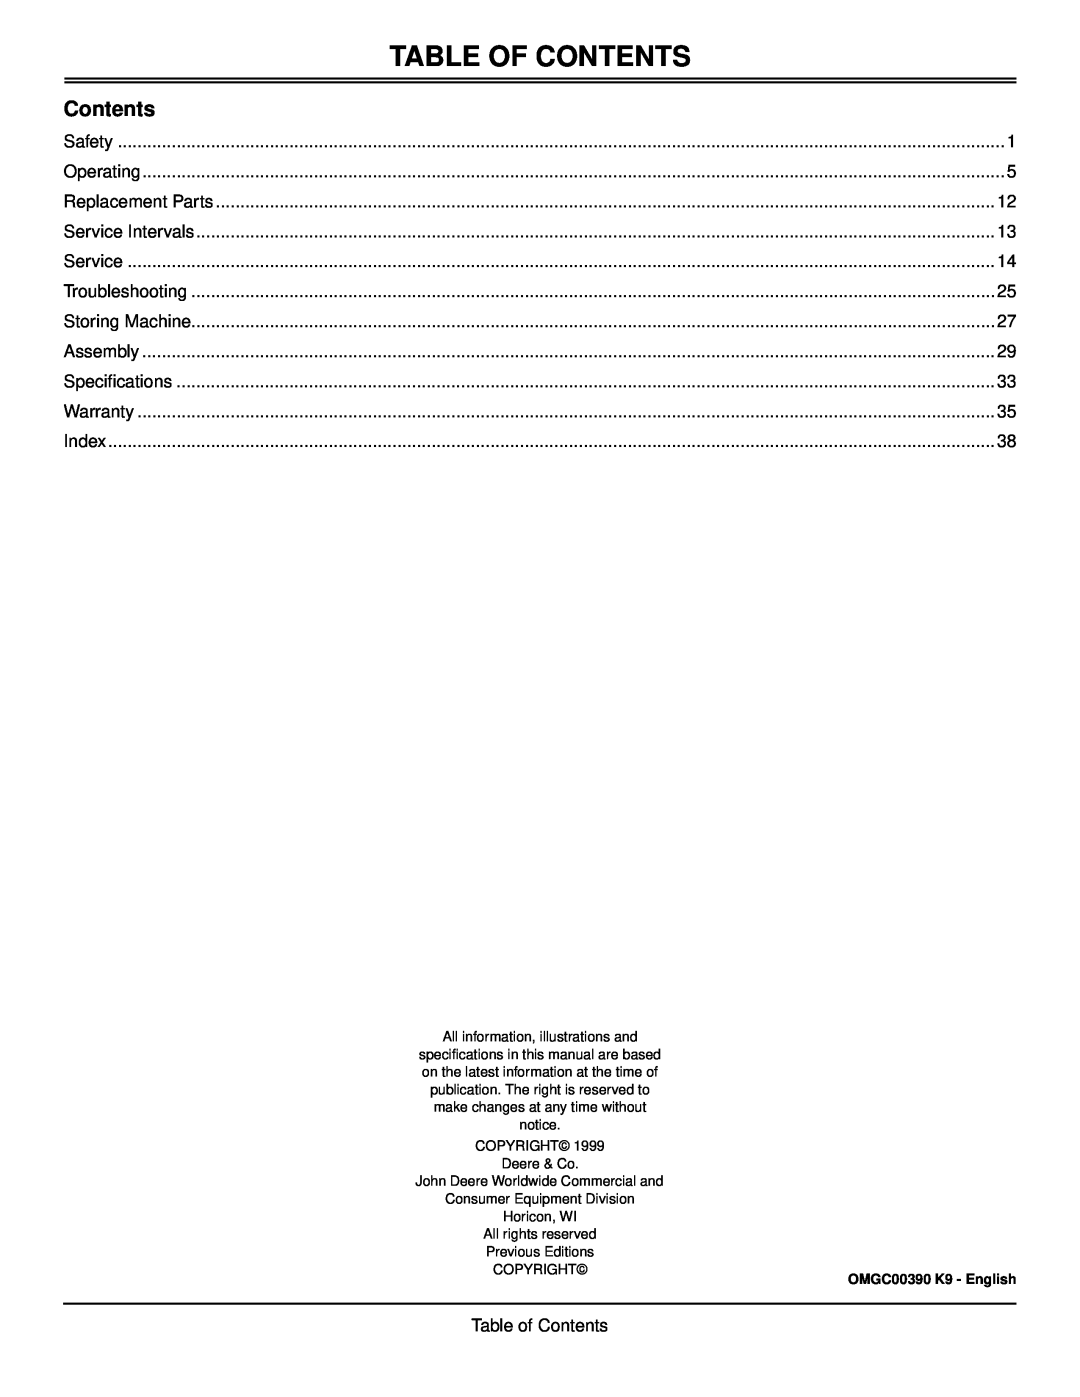 Scotts SP6213, SP6211 manual Table Of Contents, OMGC00390 K9 - English 